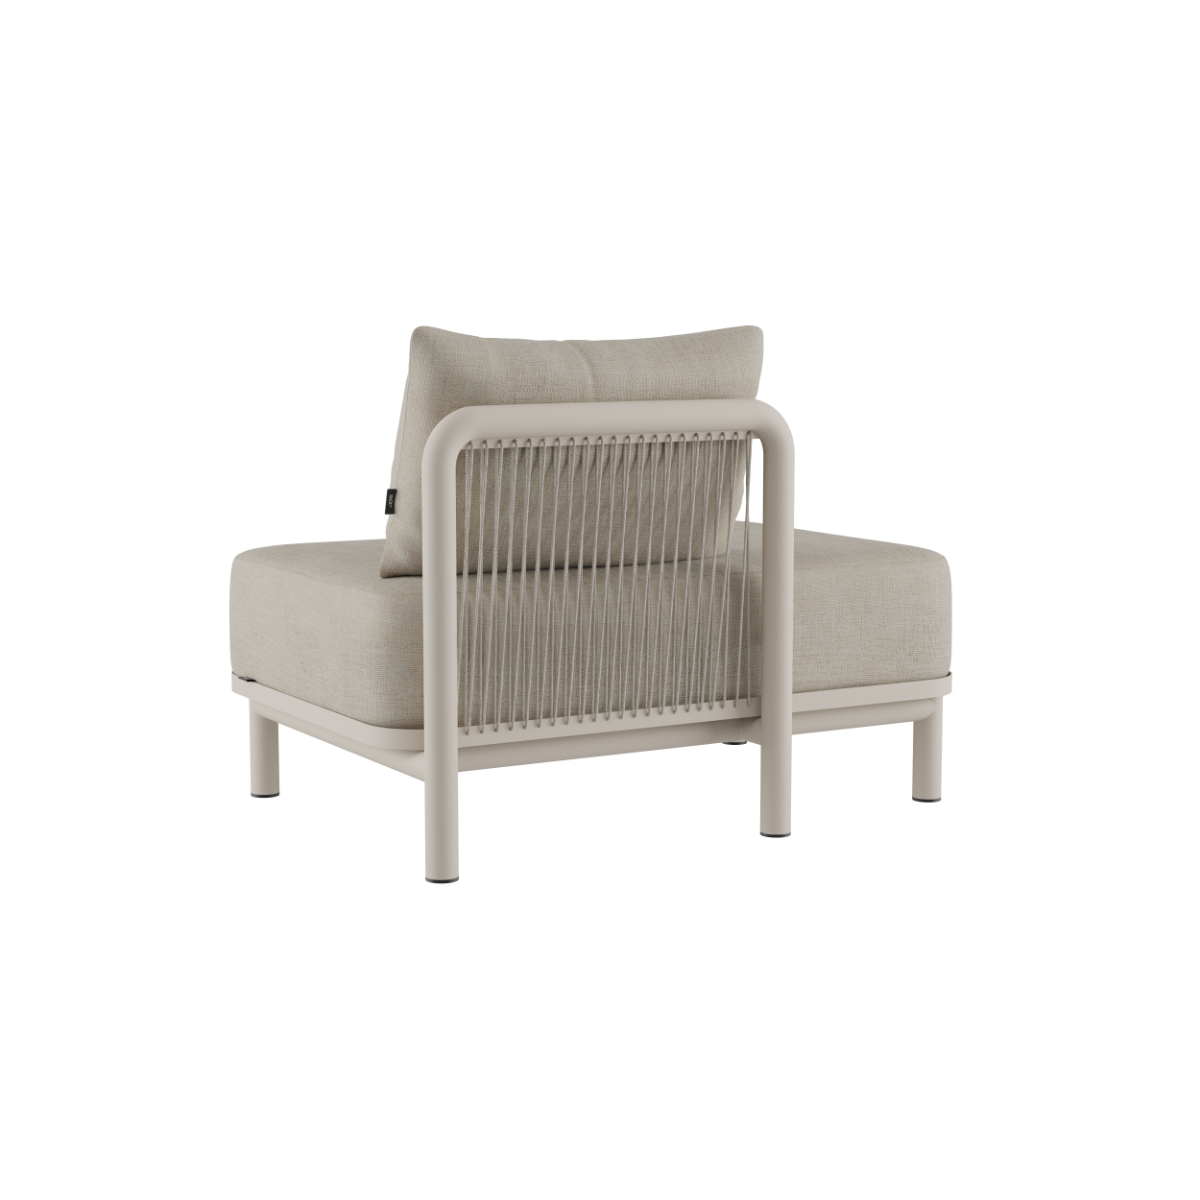 Kirra Lounge Sofa - Open end right [Contract]